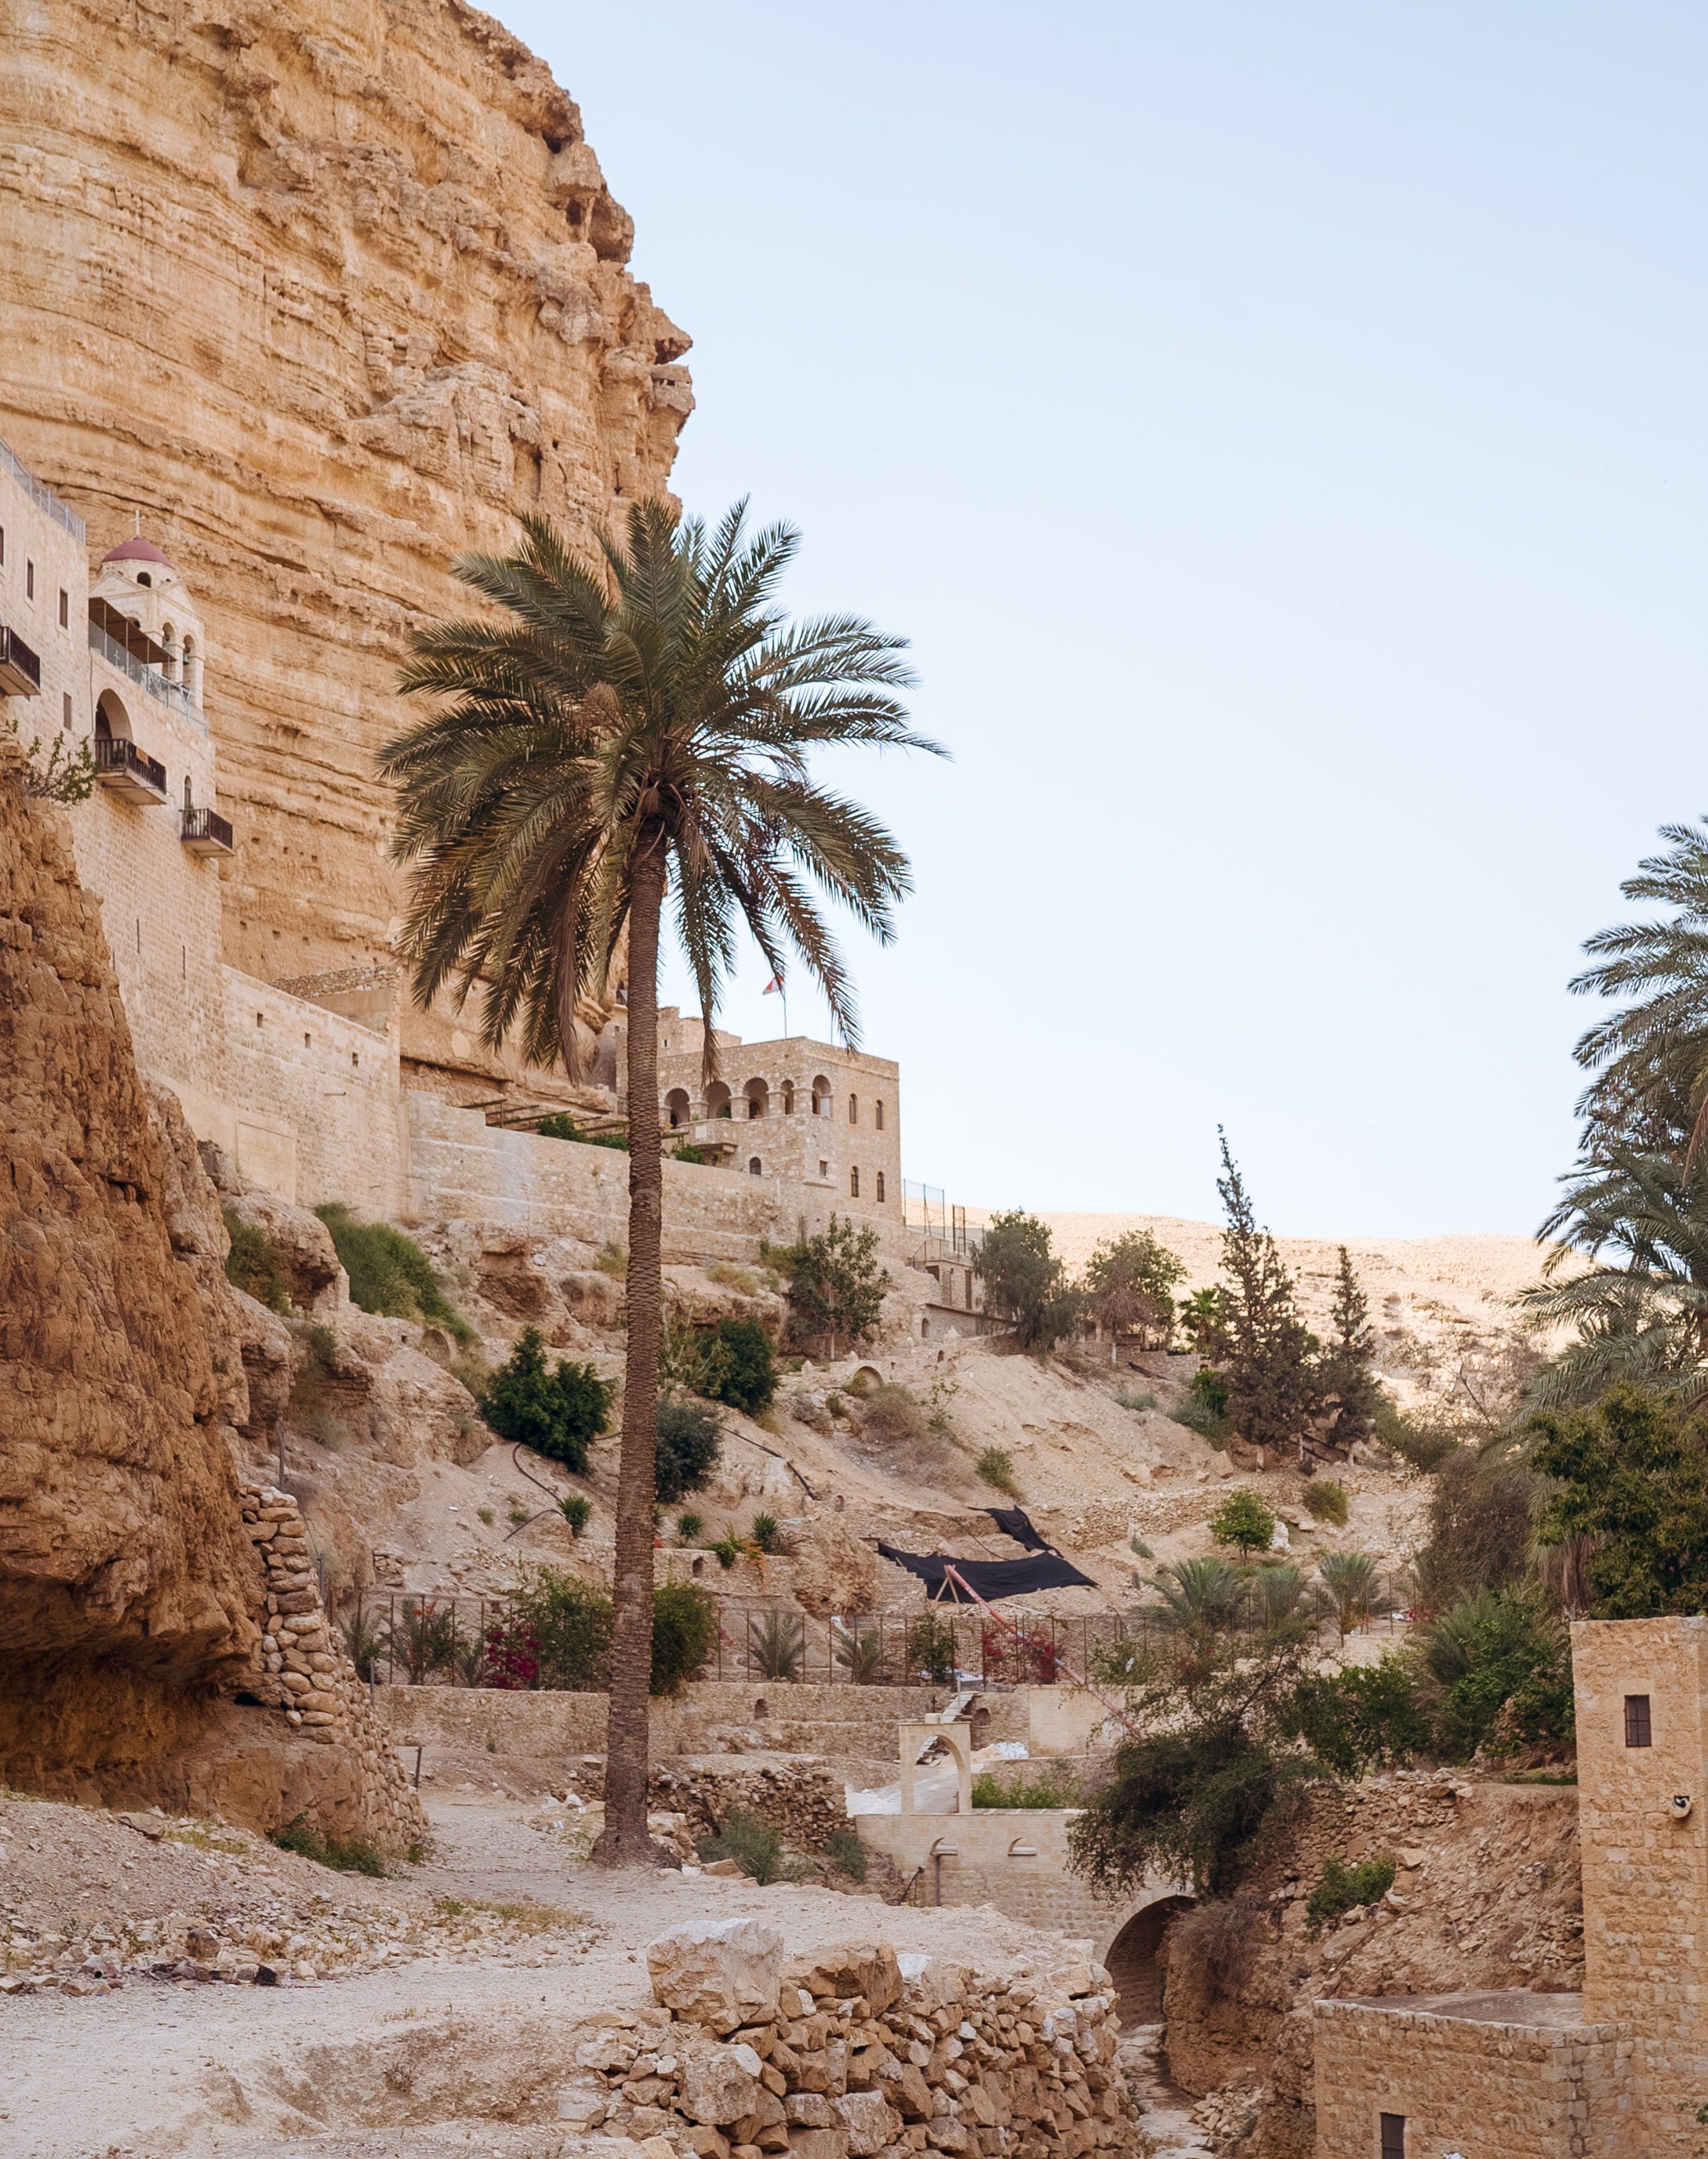 Mount of Temptation Jericho Full Day Tour with Dead Sea from Jerusalem and Tel Aviv